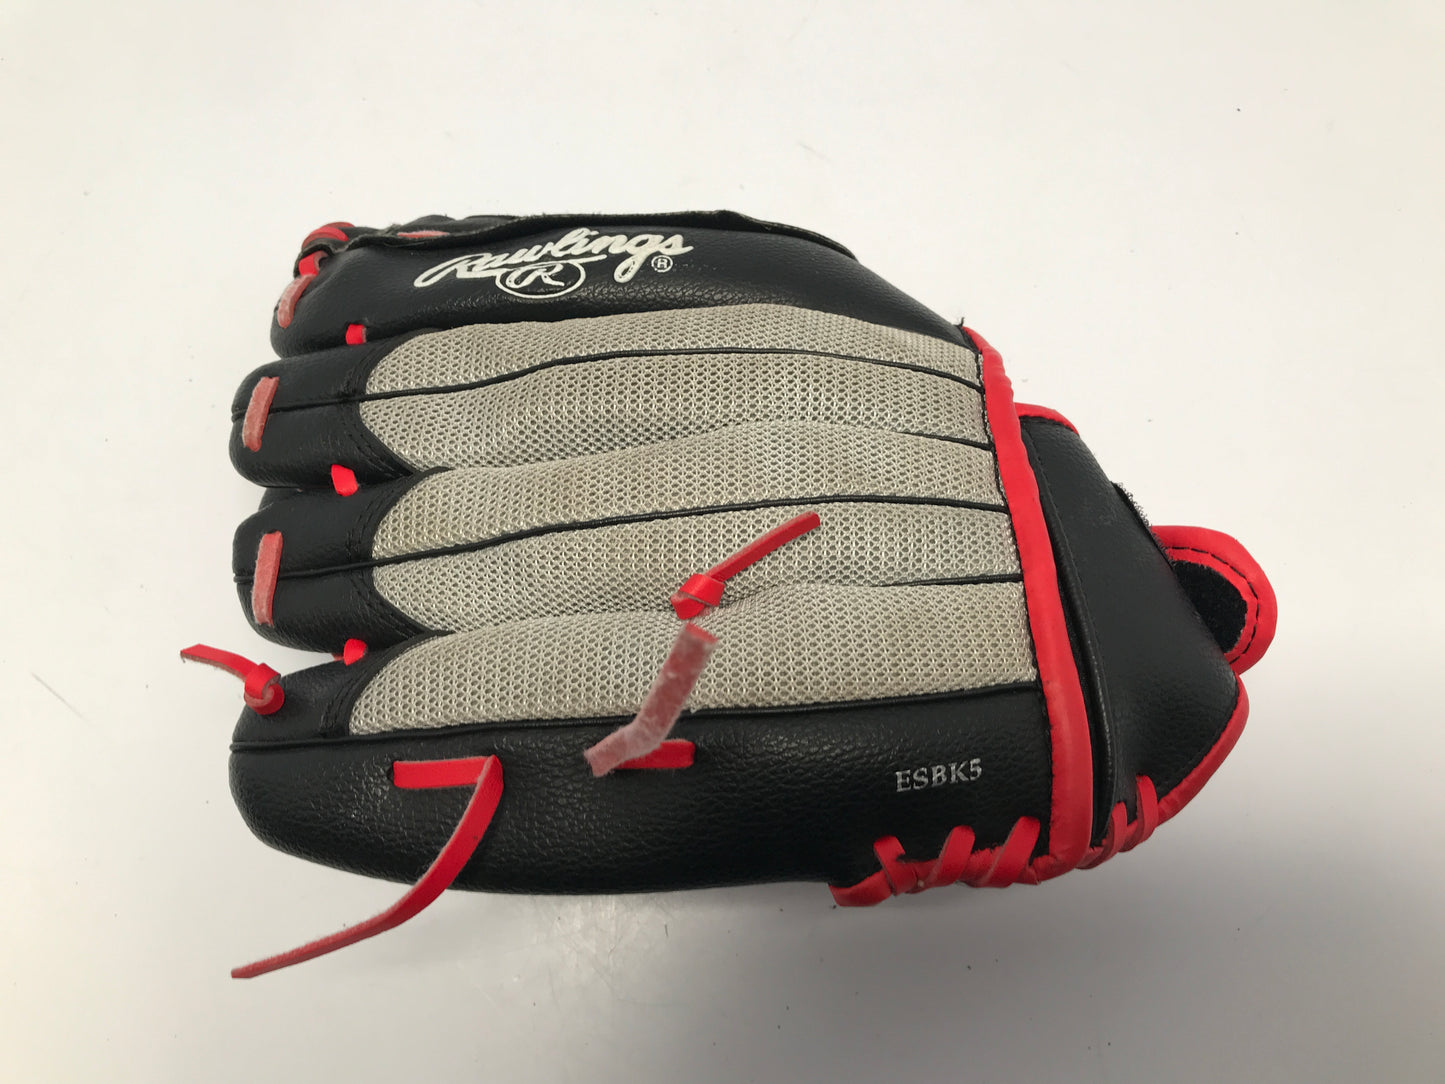 Baseball Glove Child Junior Size 11.5in Rawlings Leather Pocket Fits on Left Hand